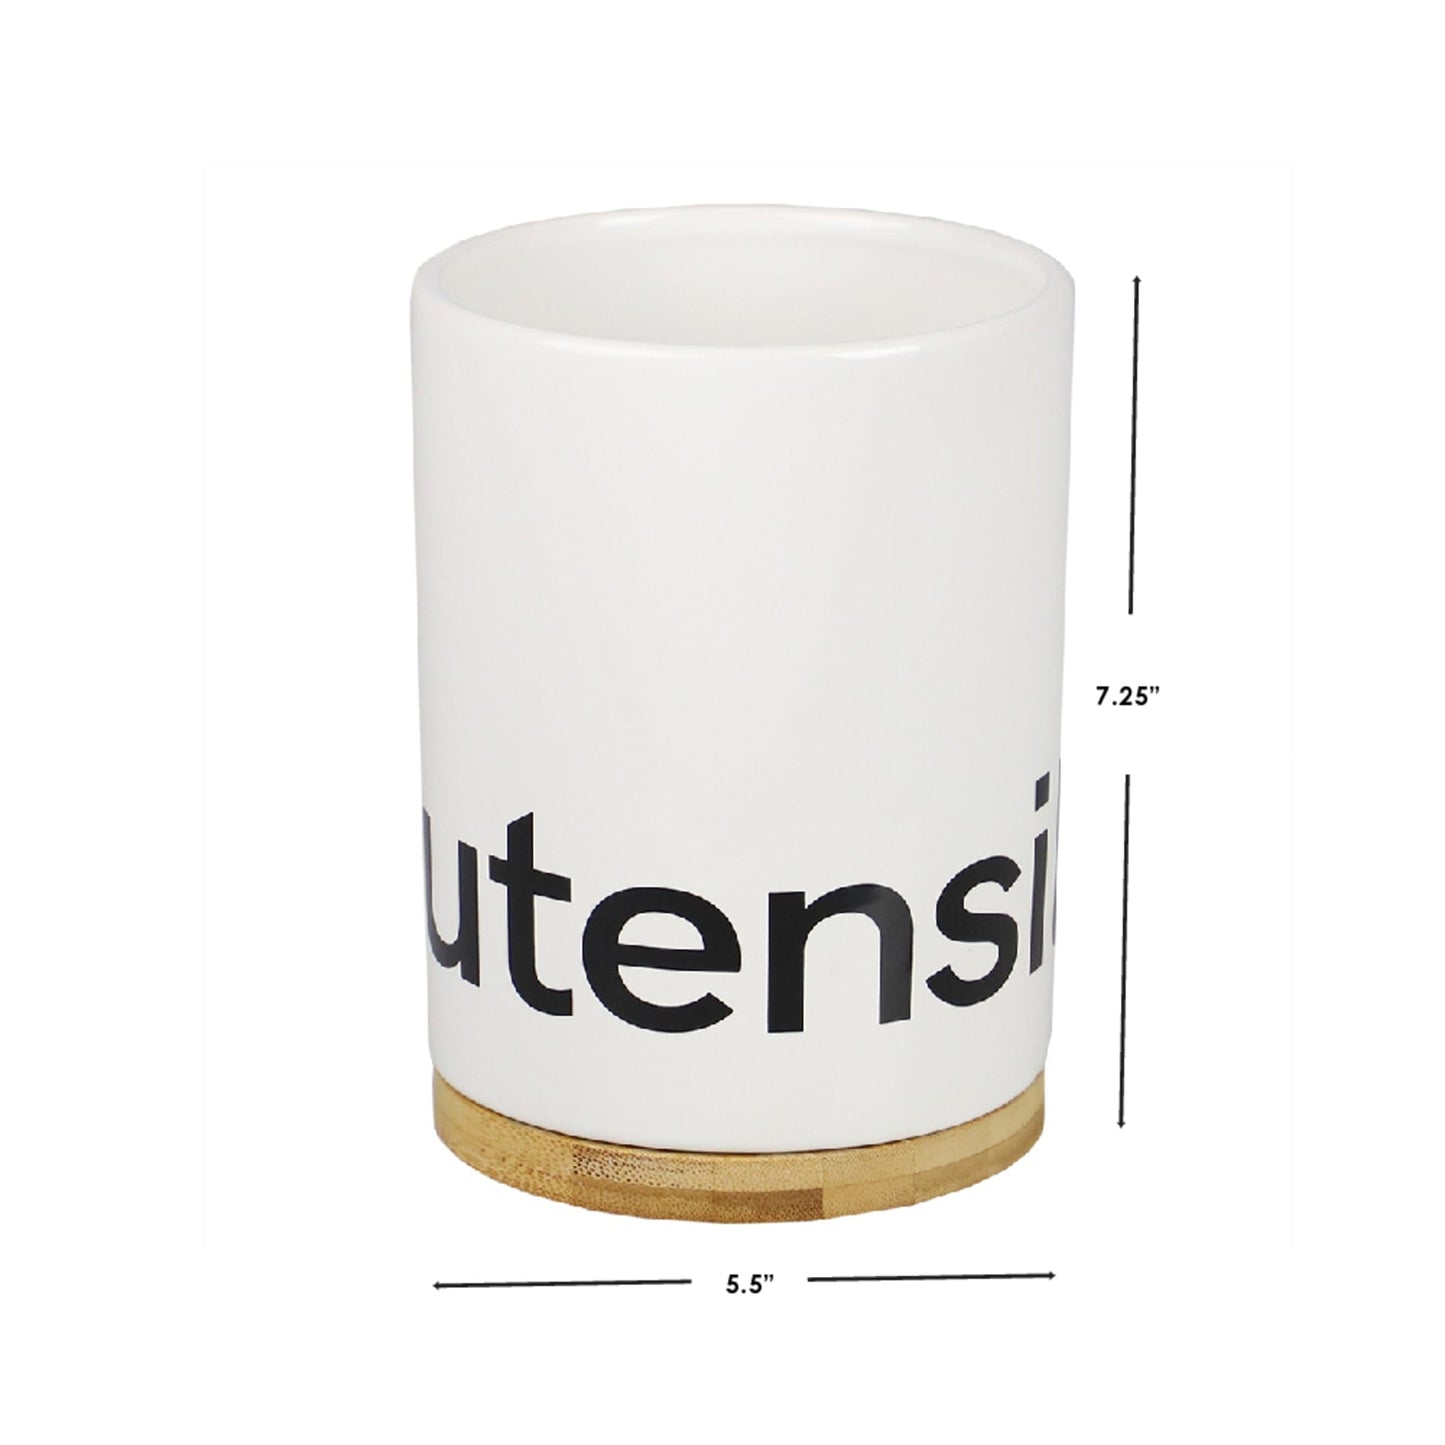 Utensil Holder with Bamboo Accents, White